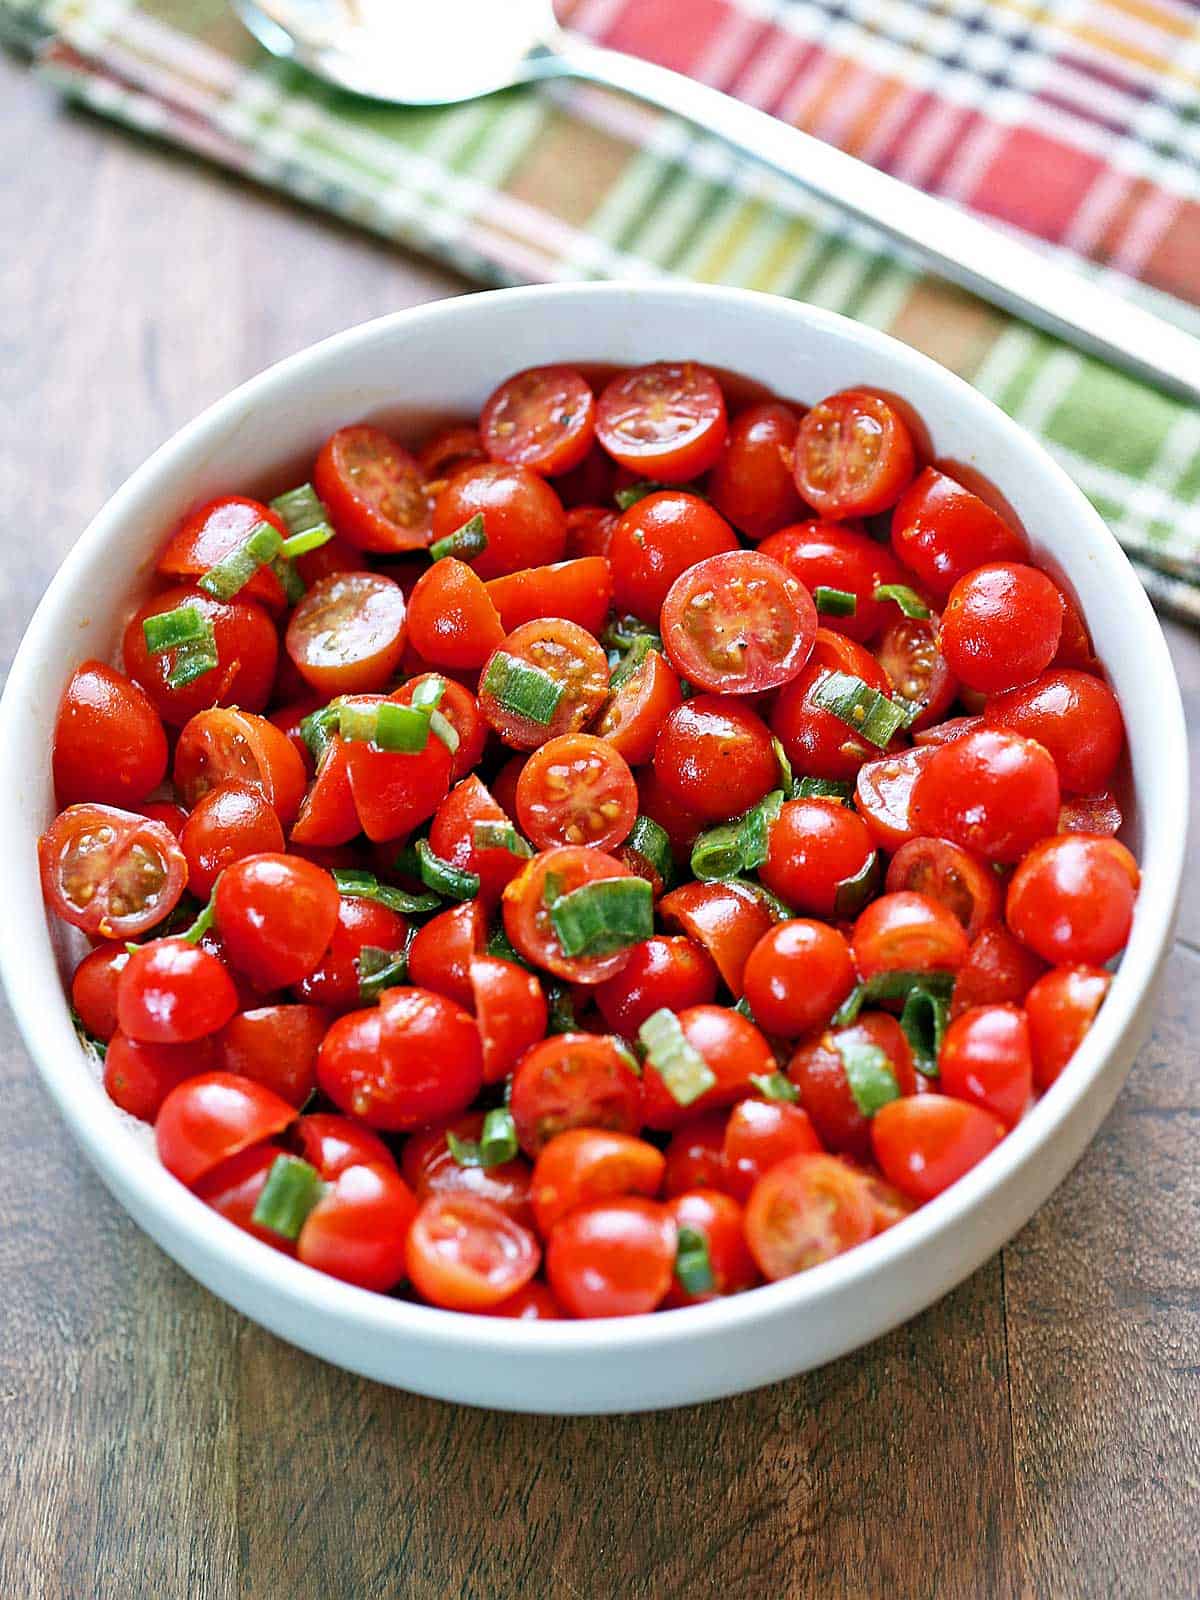 Cherry tomato salad is served in a bowl.